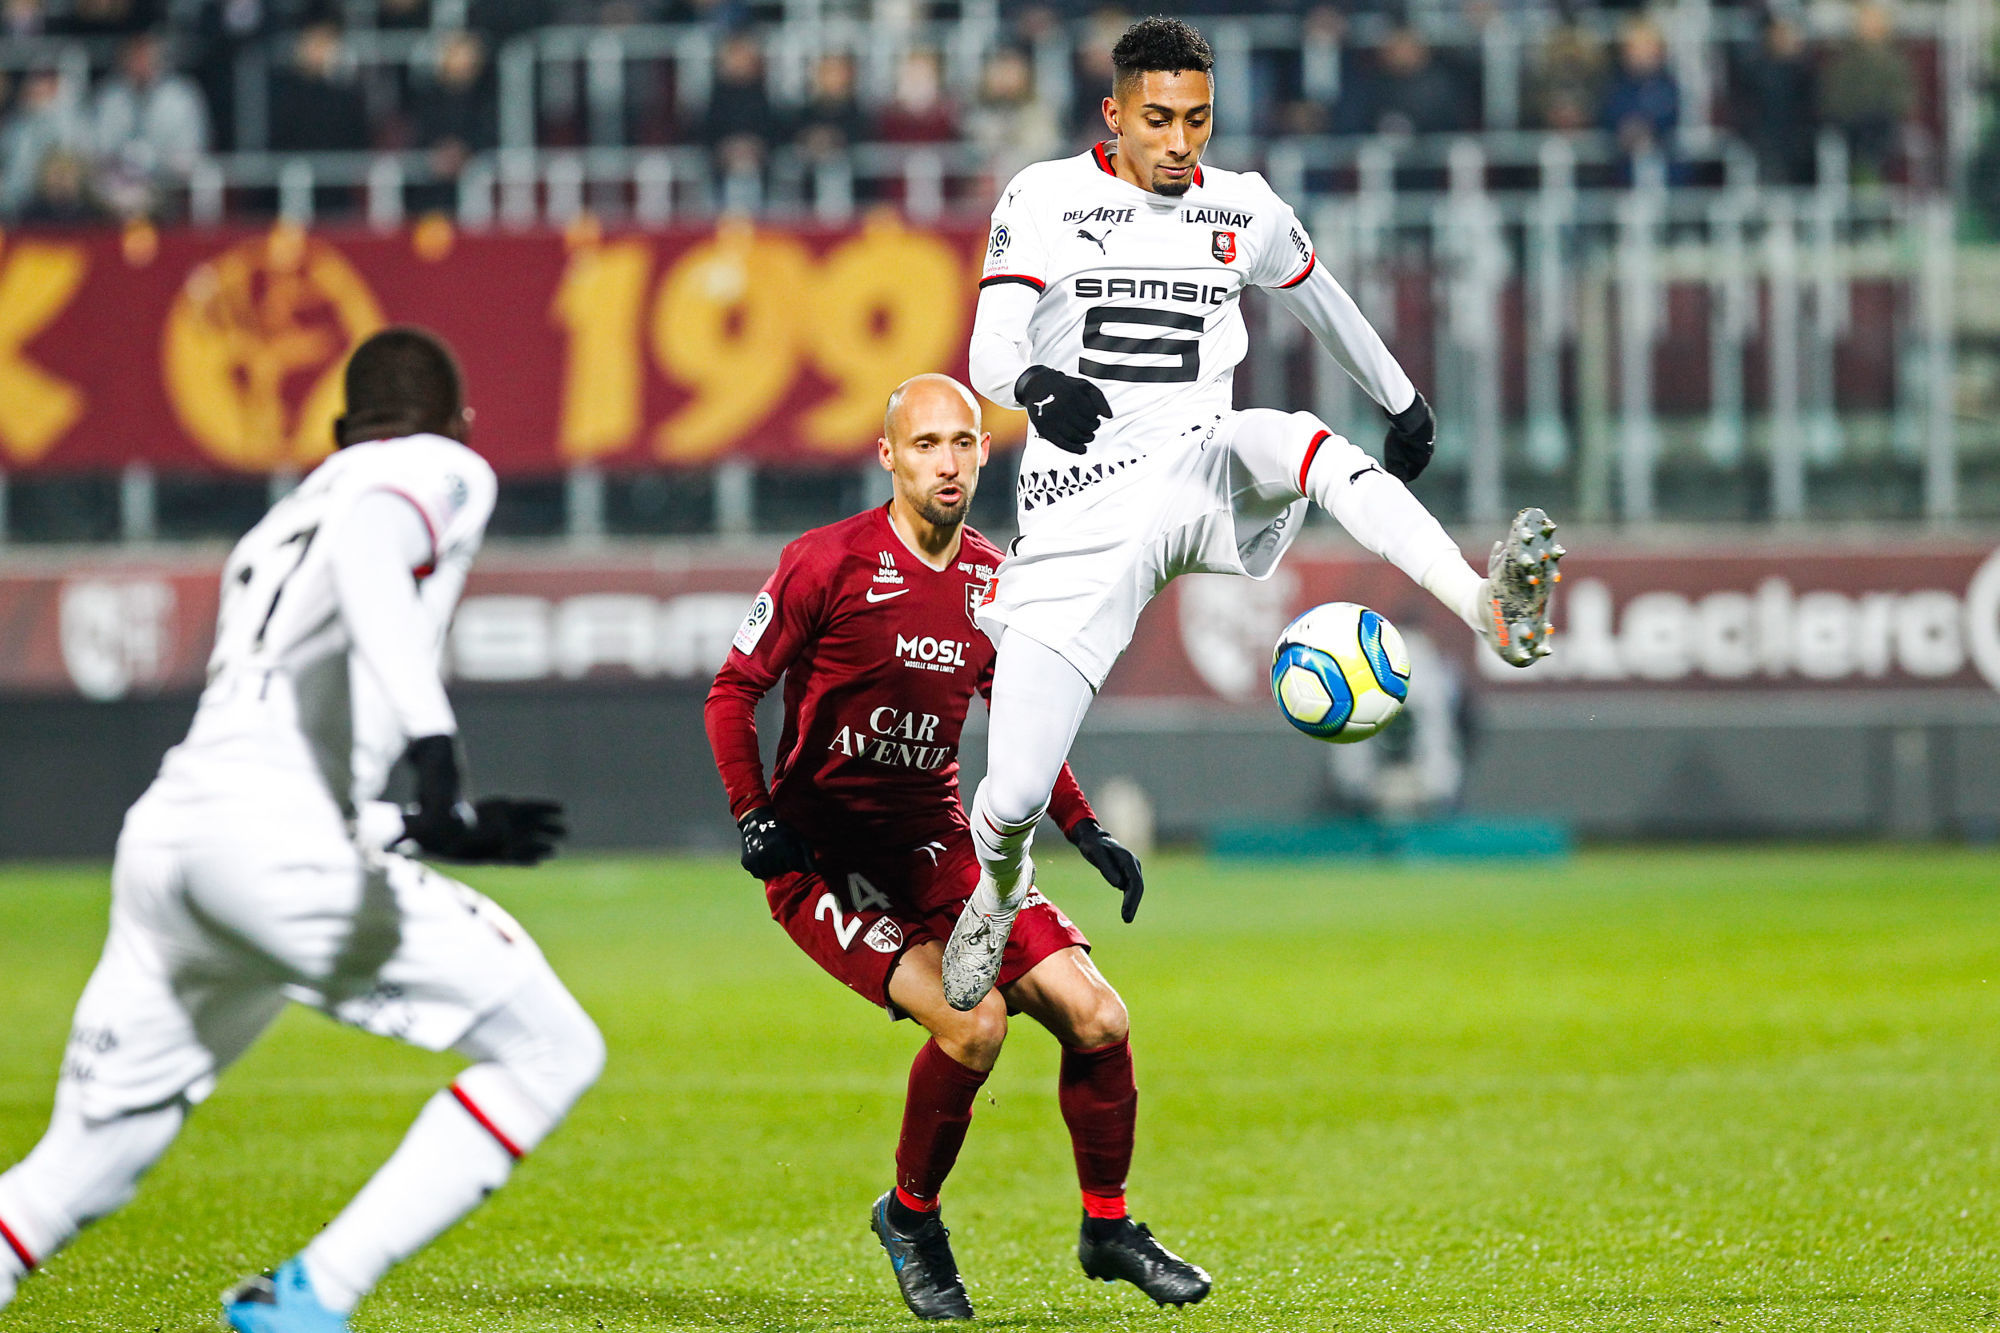 Renaud Cohade of Metz and Raphinha of Rennes during the Ligue 1 match between FC Metz and Rennes at Stade Saint-Symphorien on December 4, 2019 in Metz, France. (Photo by Fred Marvaux/Icon Sport) - Renaud COHADE - RAPHINHA - Stade Saint-Symphorien - Metz (France)